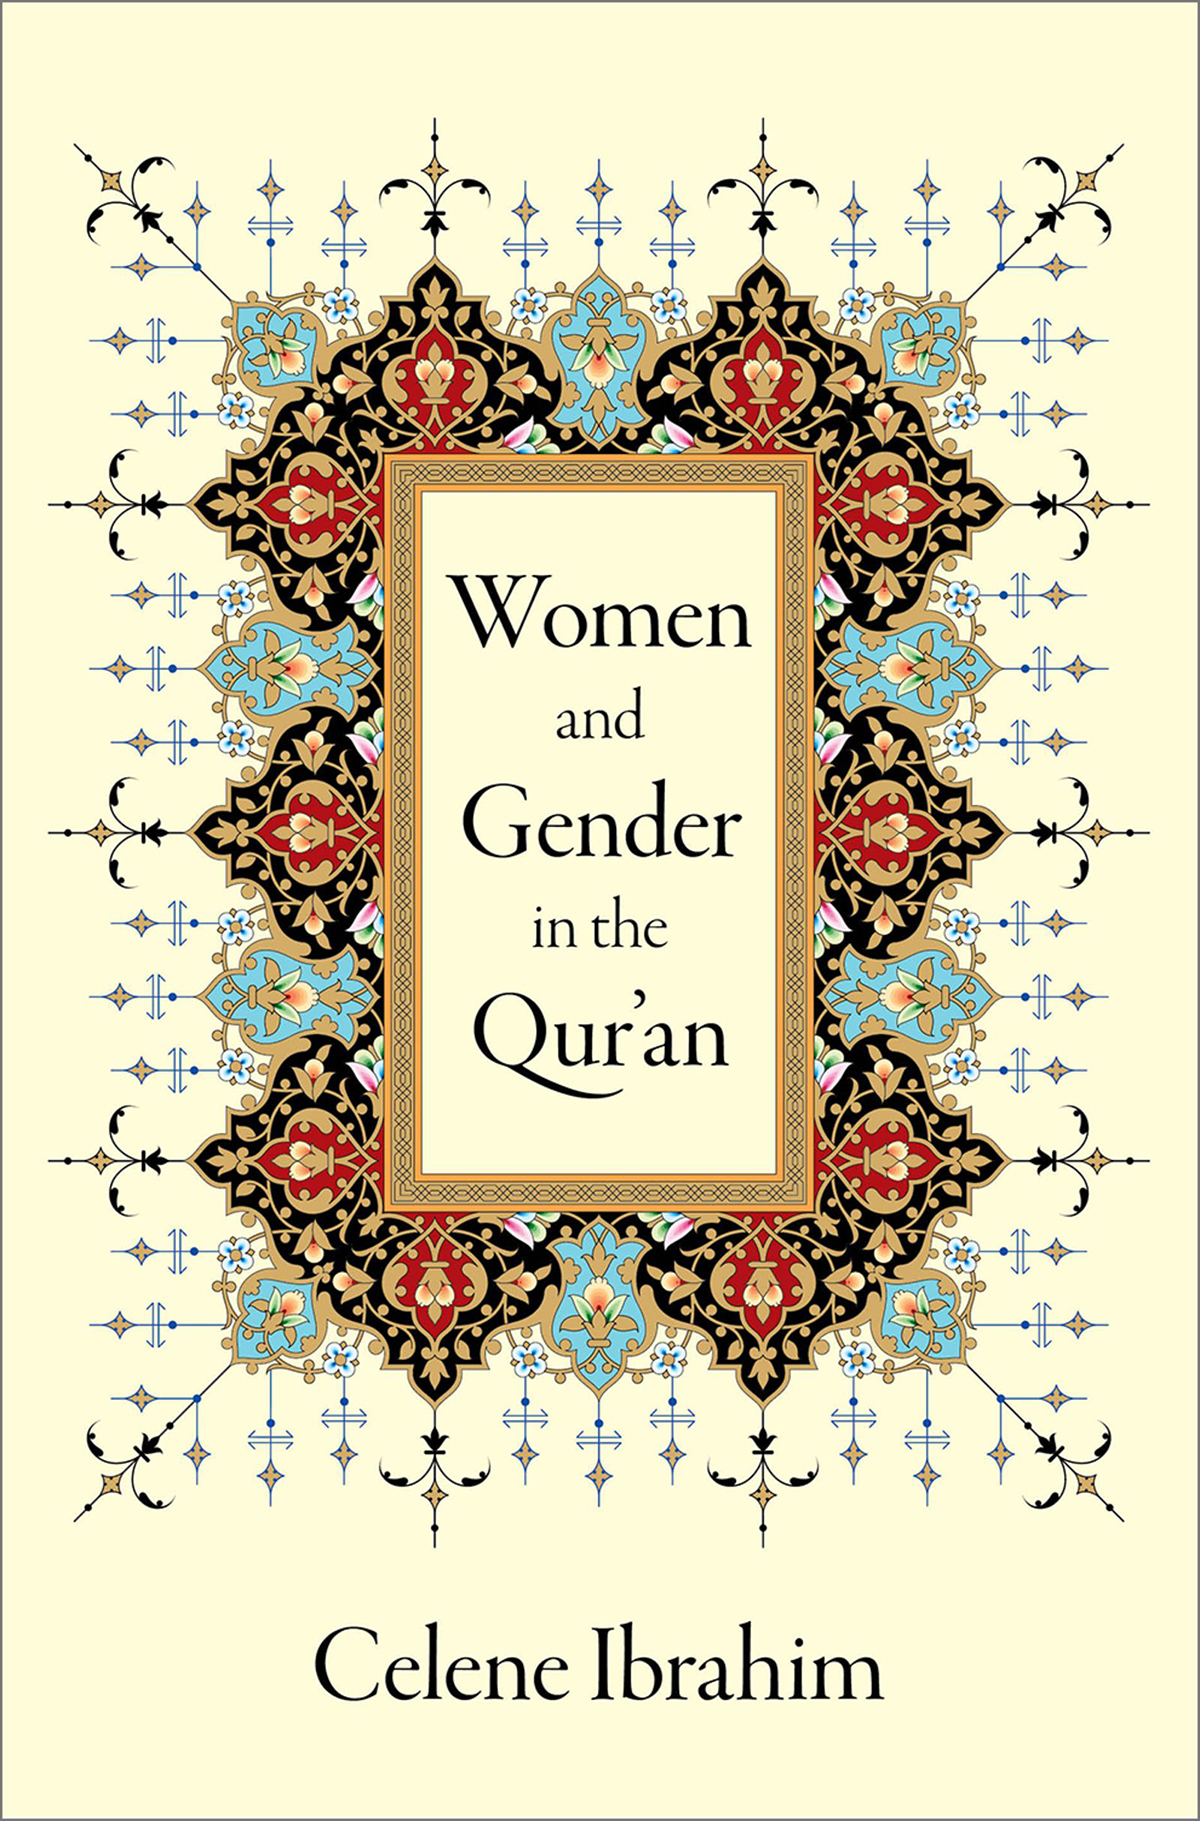 Women and Gender in the Quran - image 1